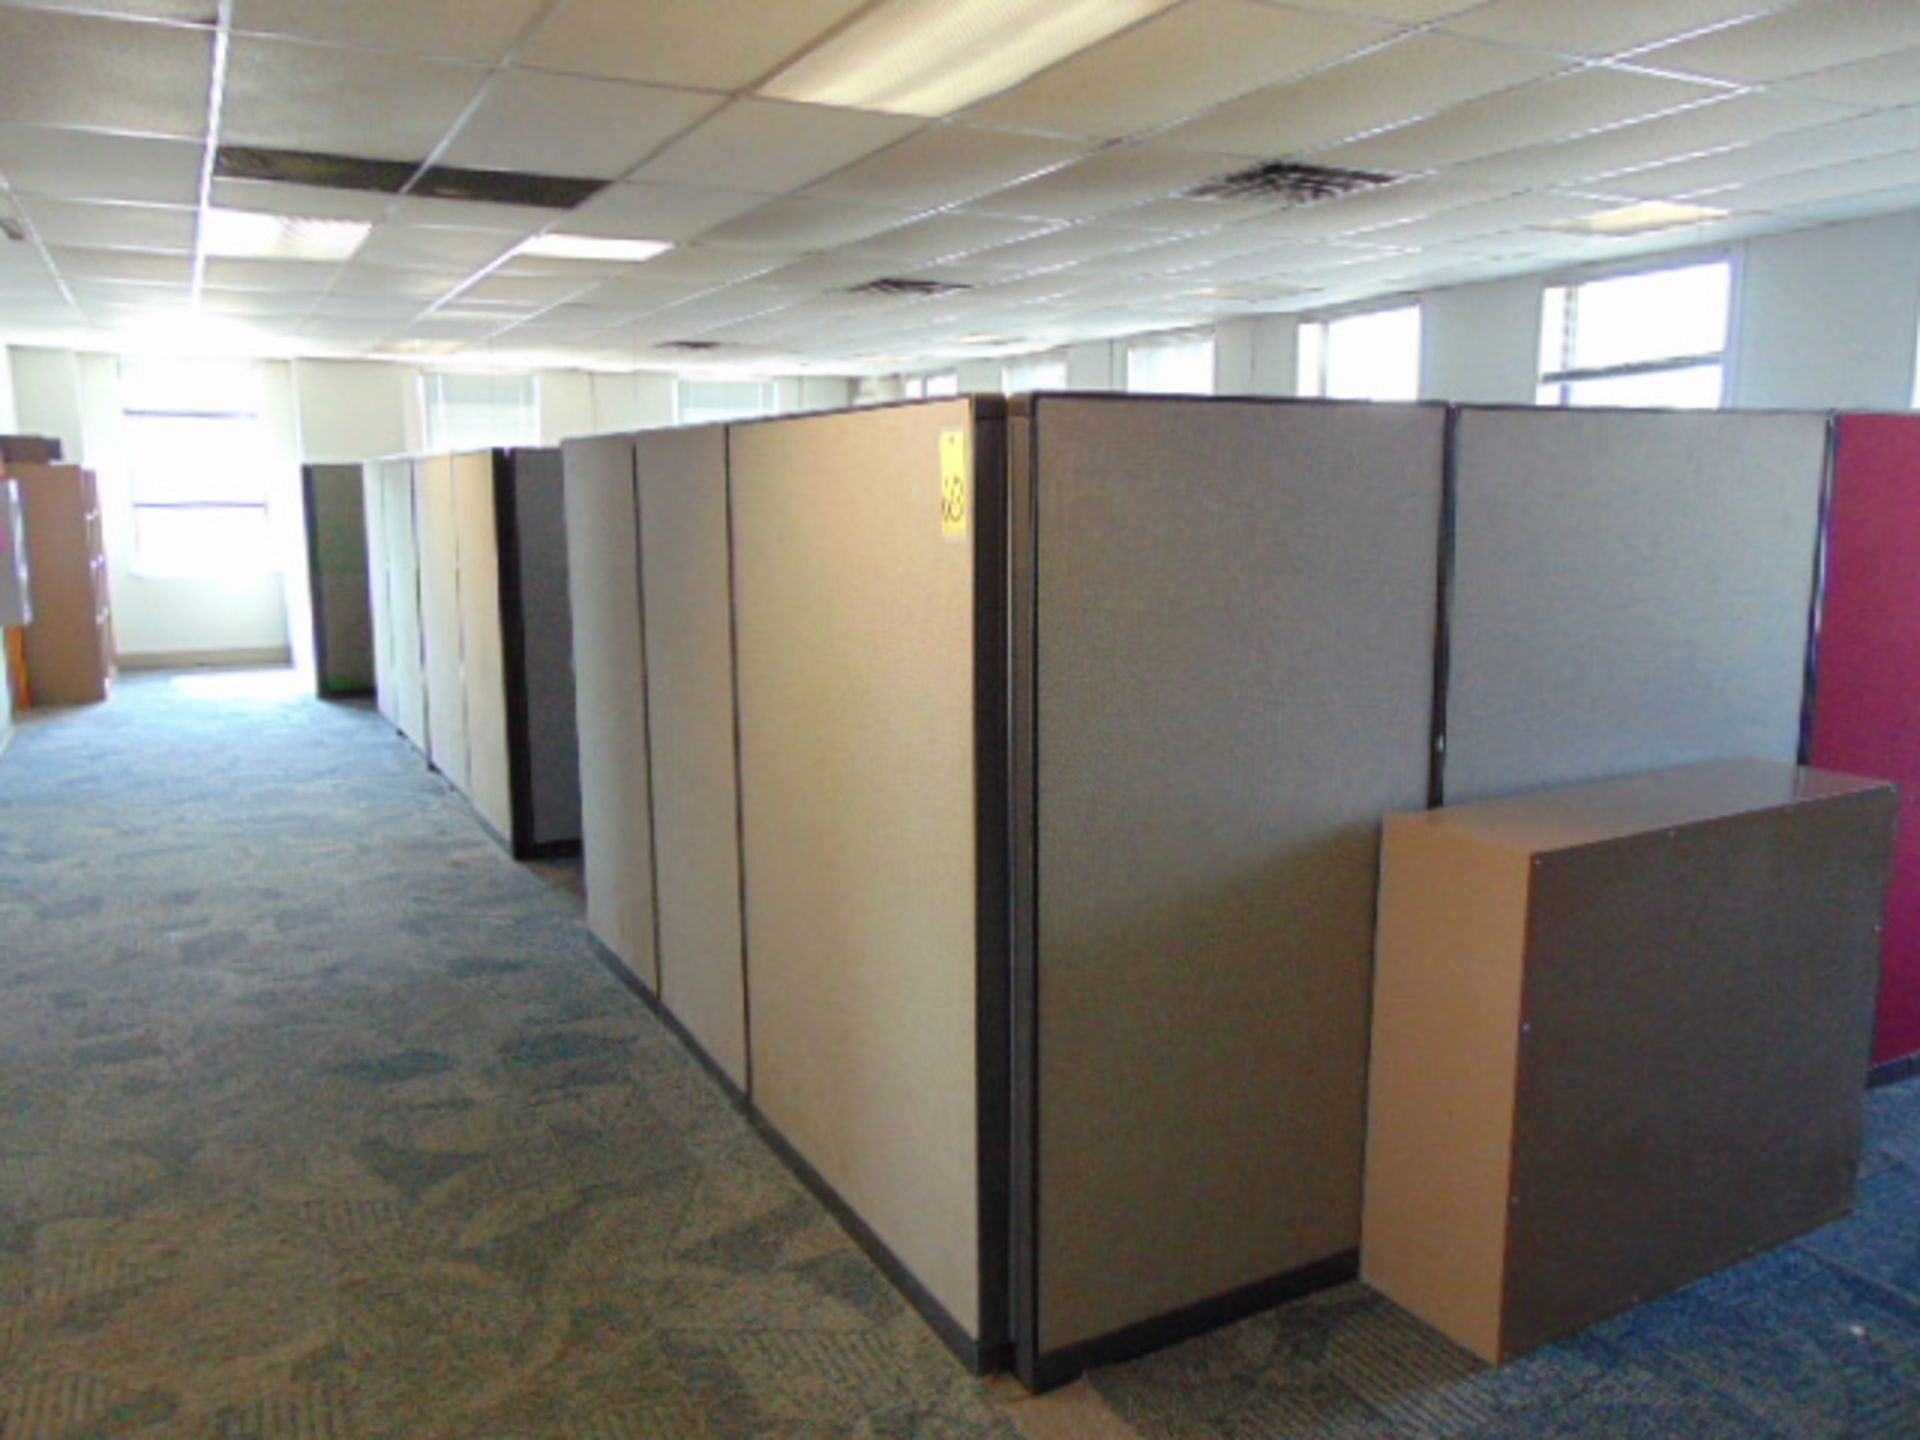 LOT OF OFFICE CUBICLES (located upstairs)